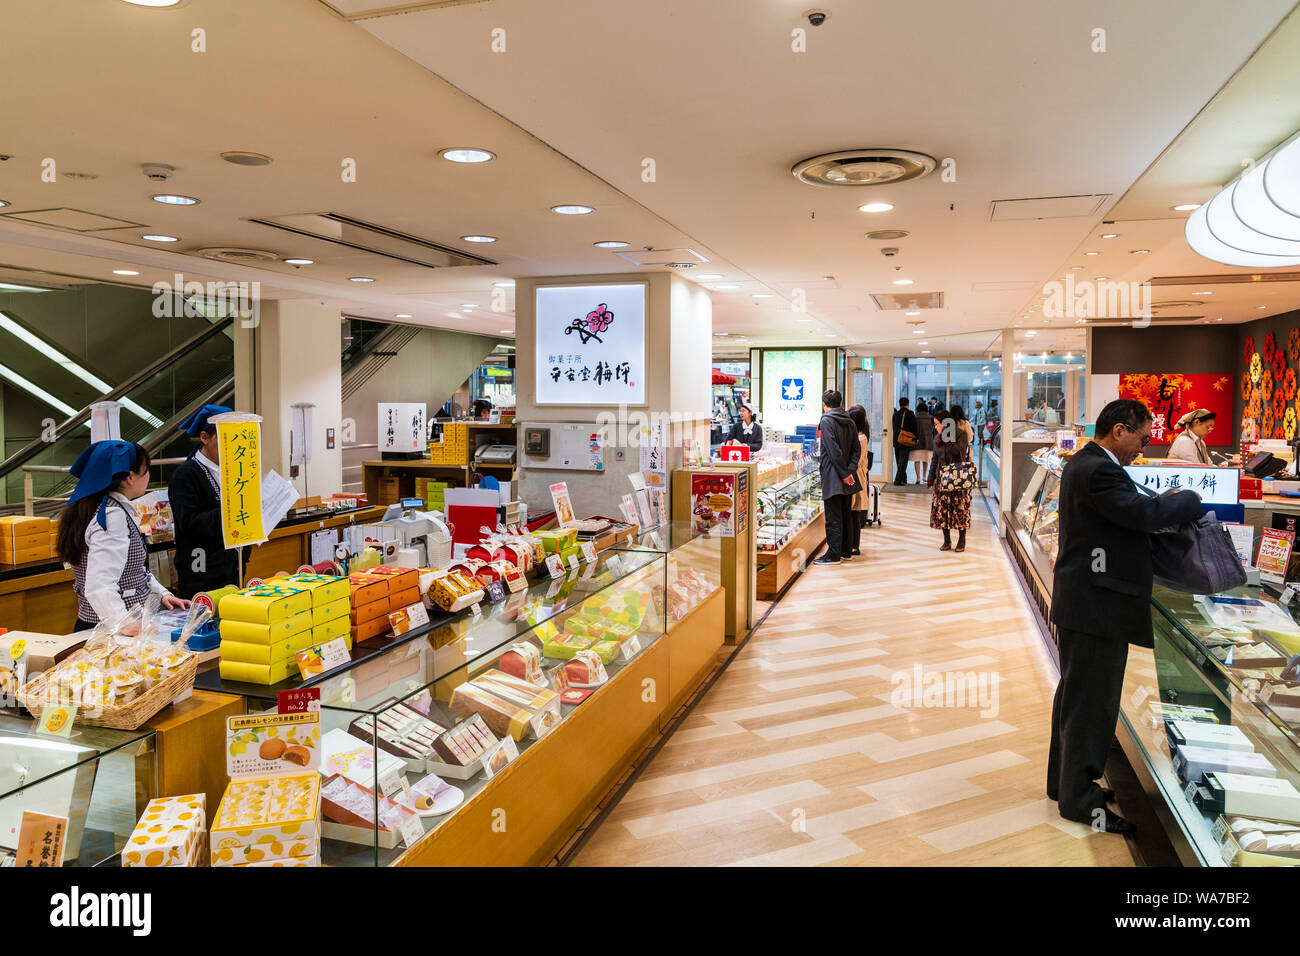 Japan, Hiroshima station interior. View along sweet gift counter and aisle to shopping area entrance. Salaryman at one counter, other people looking. Stock Photo